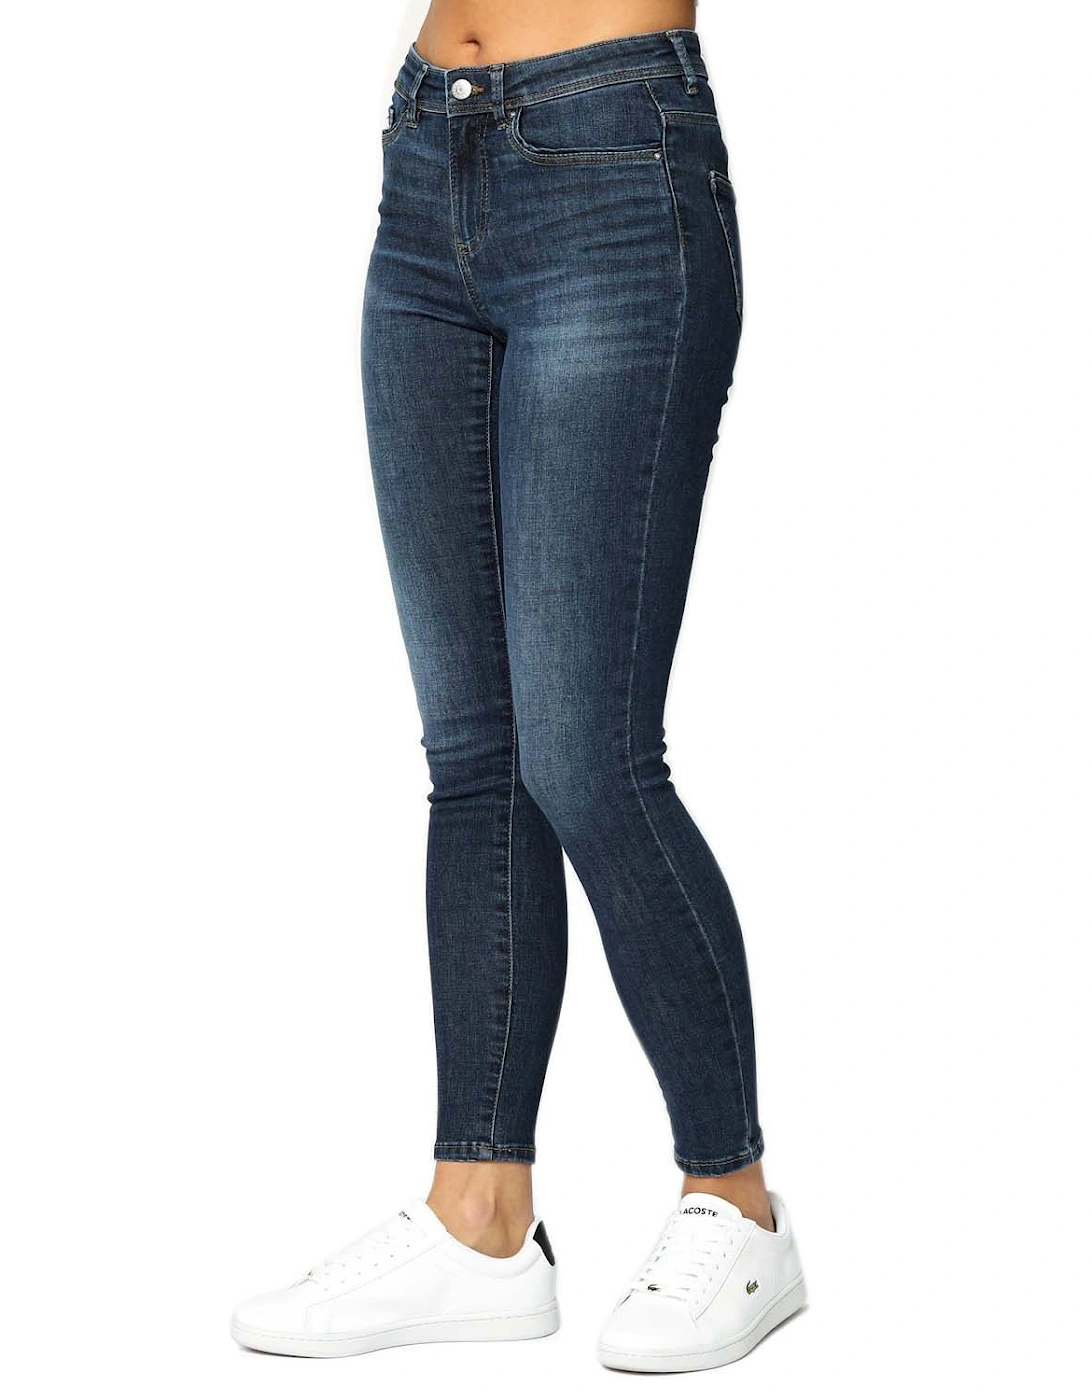 Womens Wauw Mid Rise Skinny Jeans